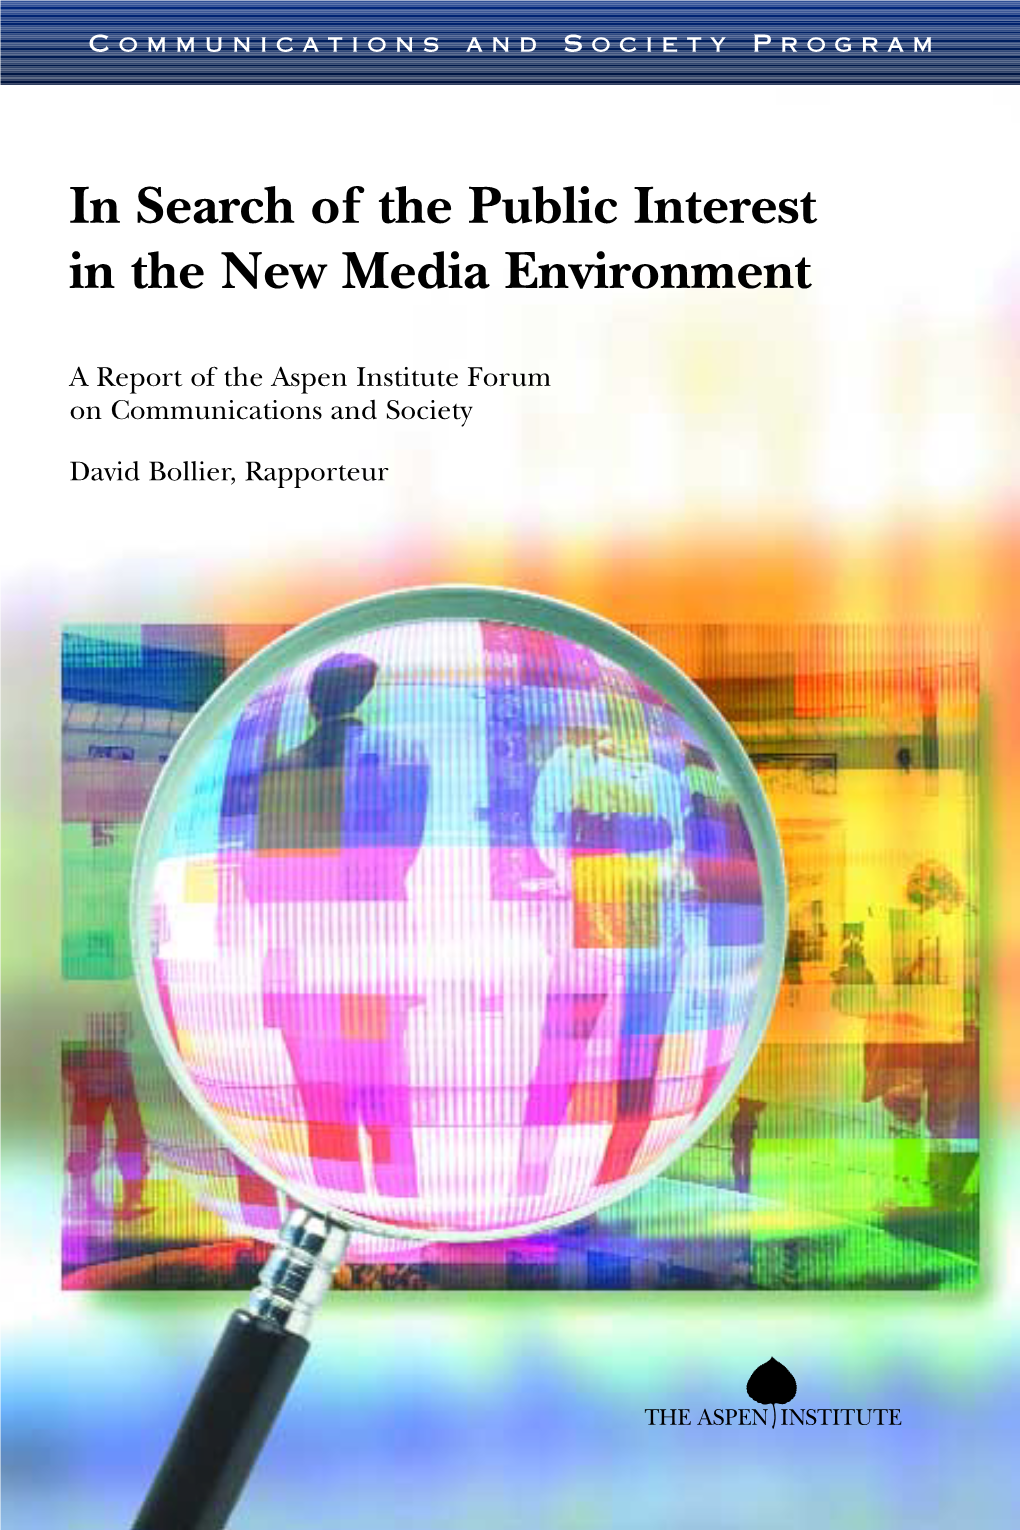 In Search of the Public Interest in the New Media Environment